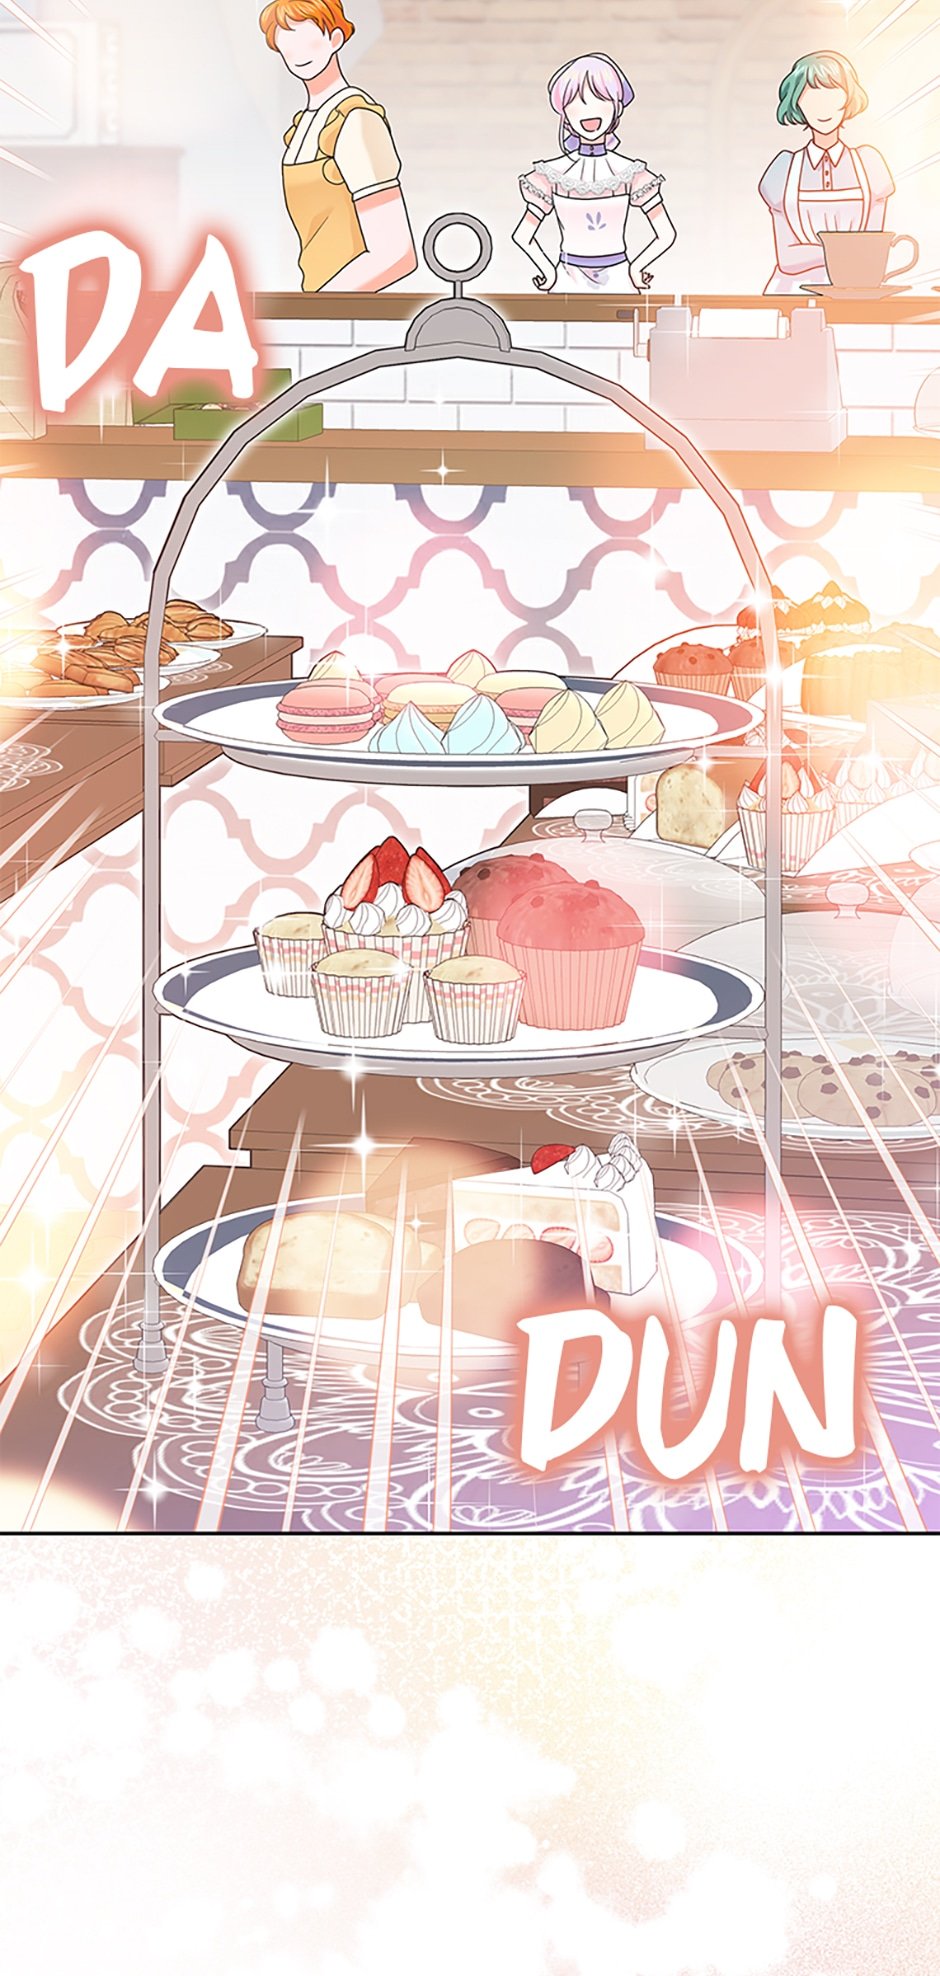 She came back and opened a dessert shop chapter 48